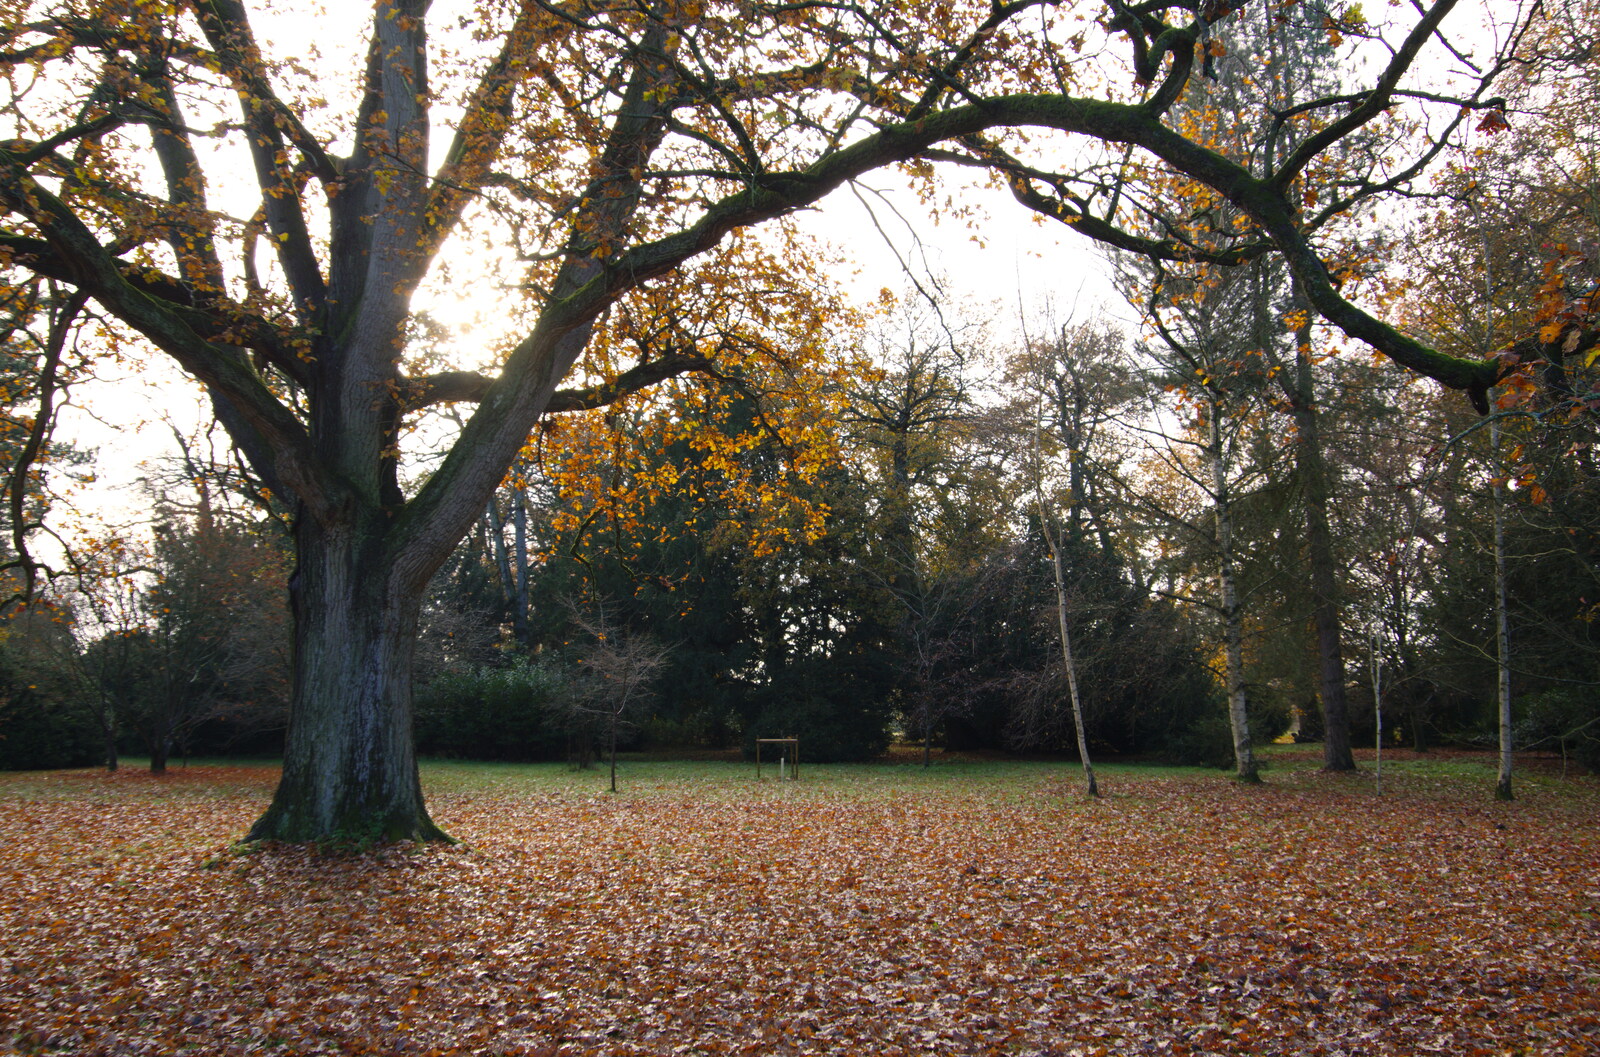 A tree and a carpet of leaves from The Tiles of Ickworth House, Horringer, Suffolk - 30th November 2019